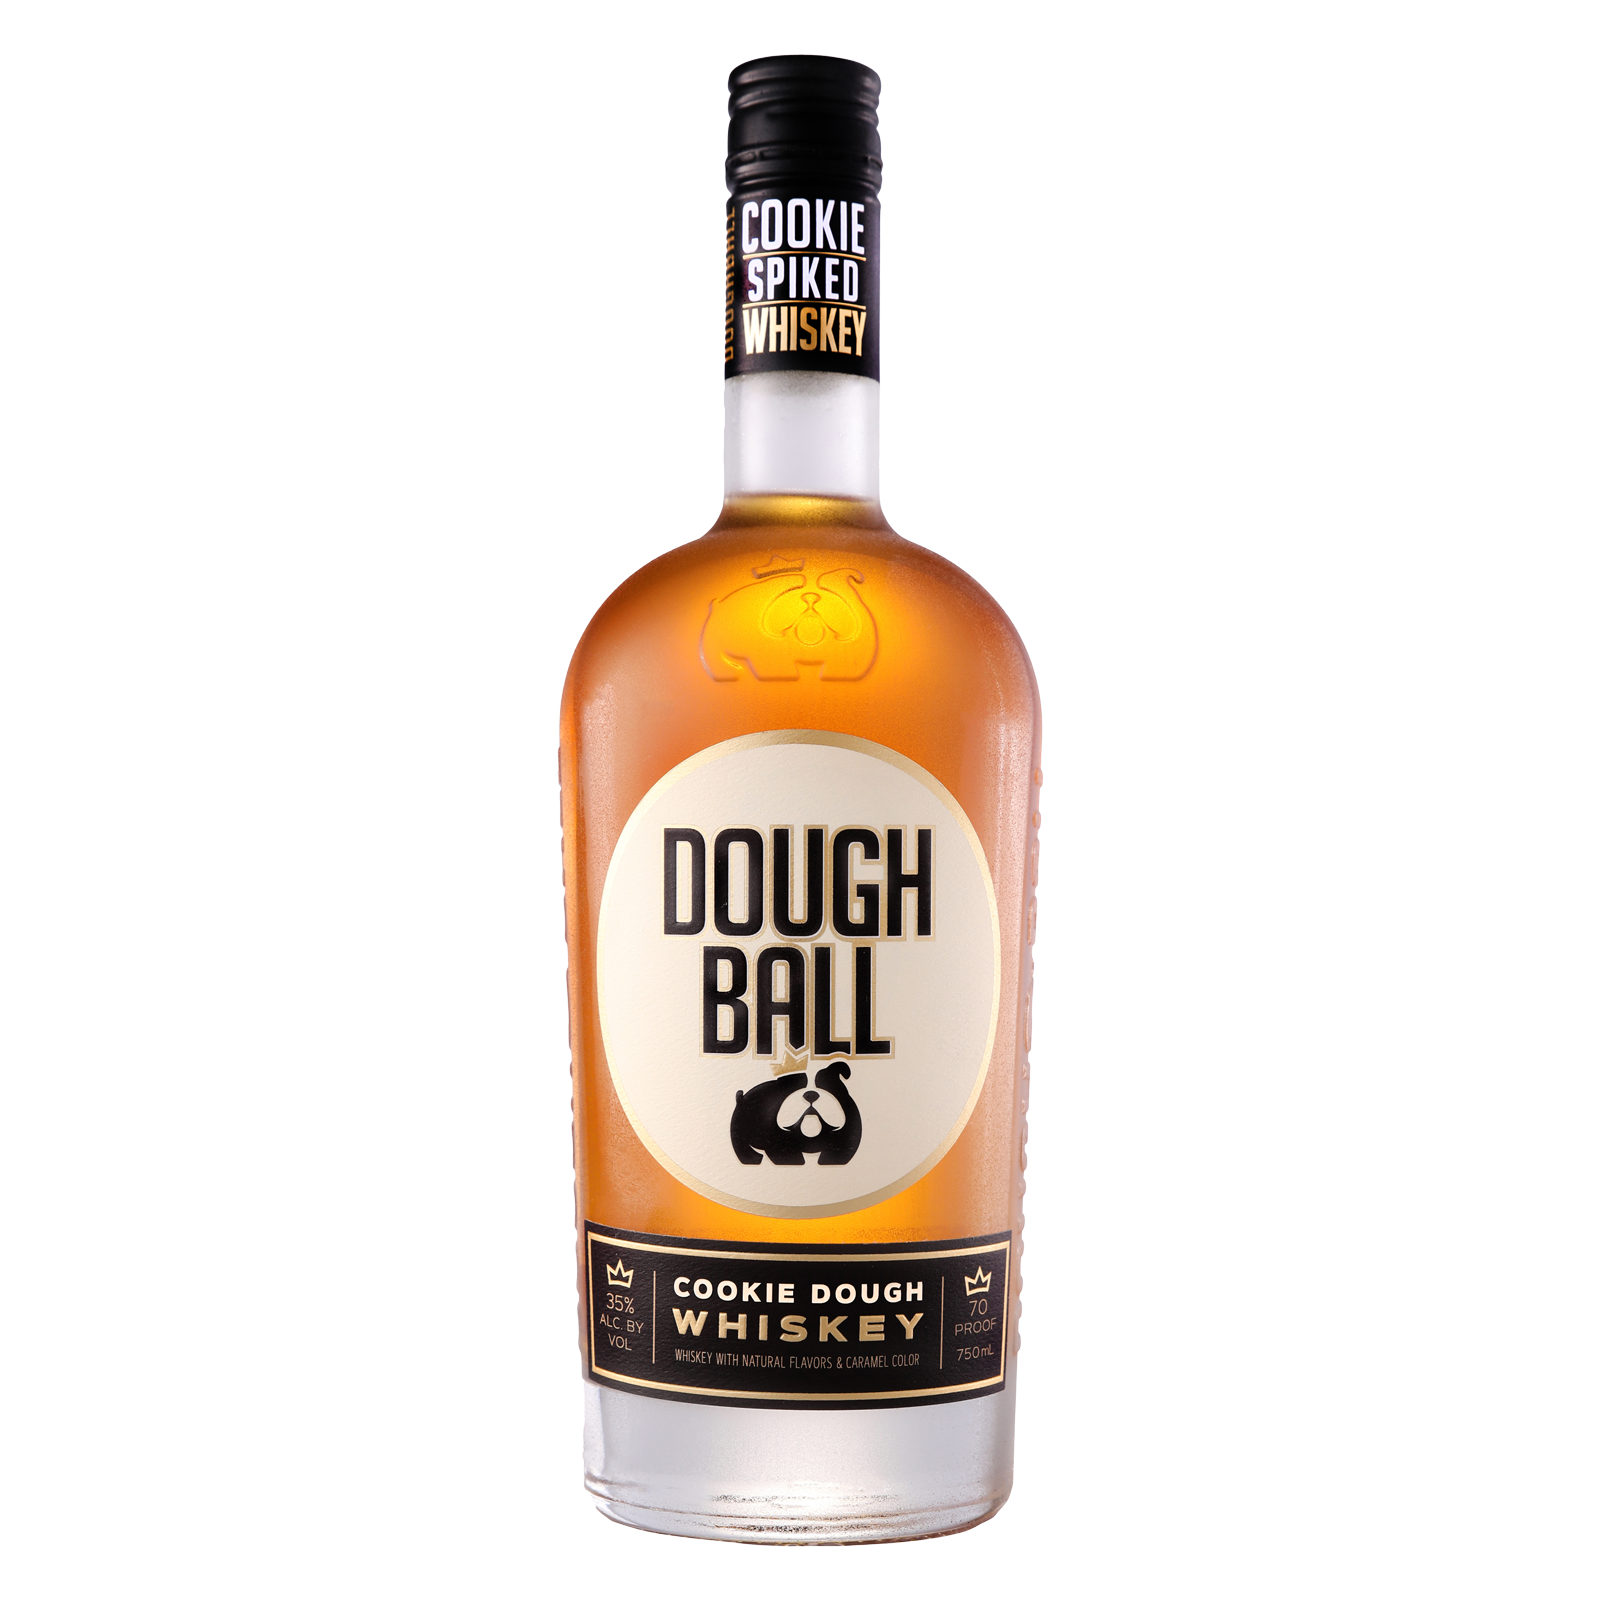 Dough Ball Cookie Dough Spiked Whiskey 750ml (70 Proof)